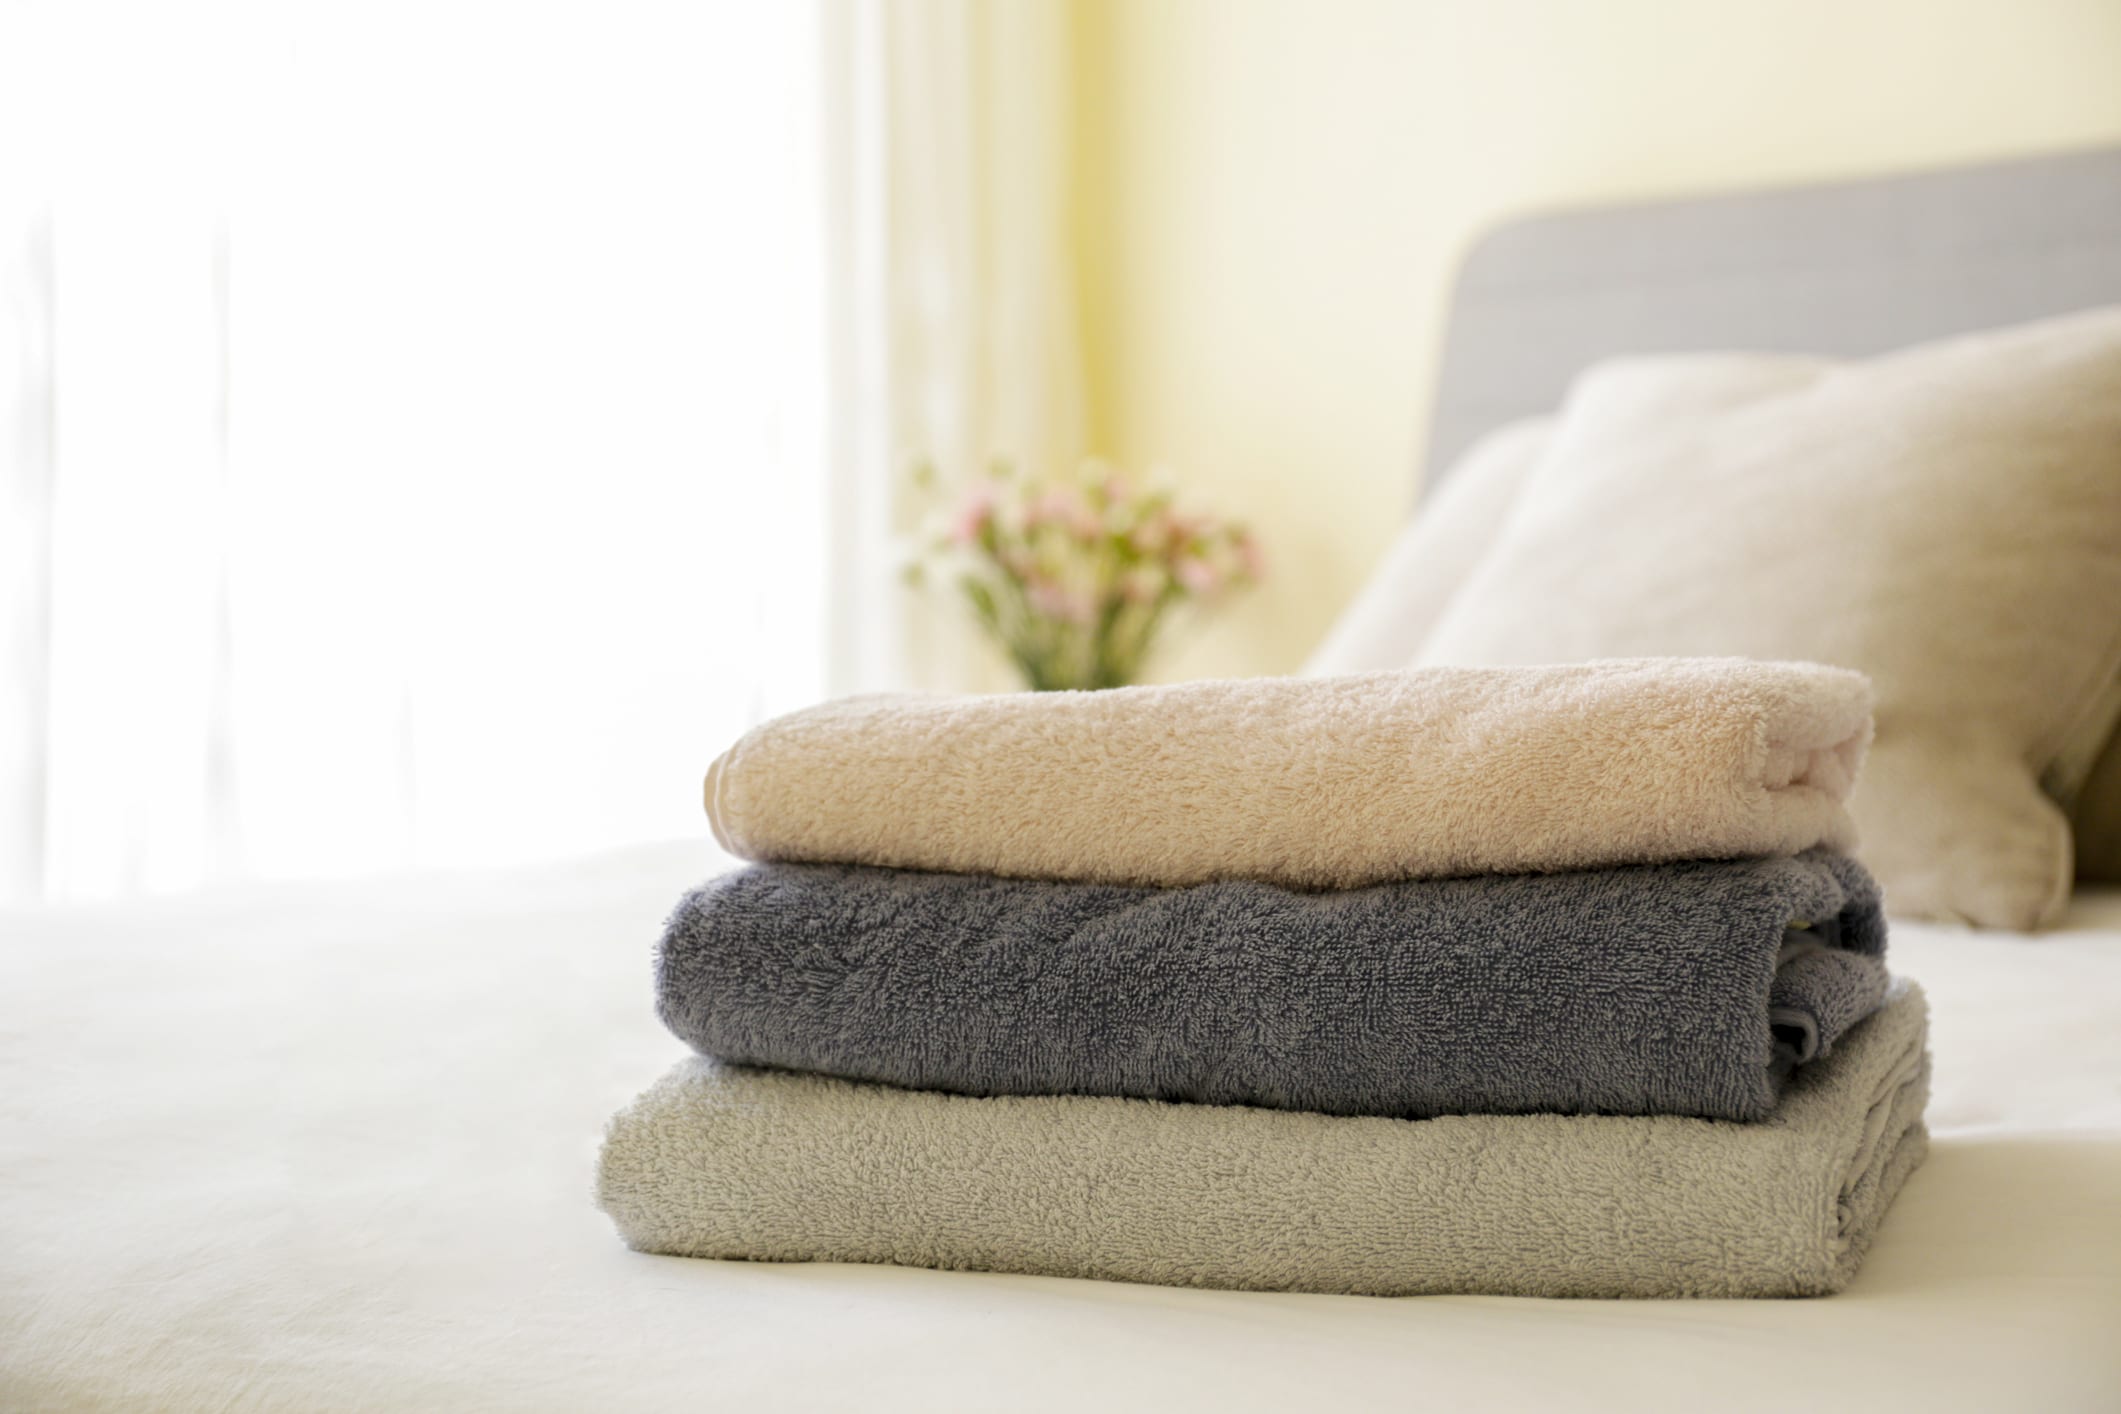 Why Environmentally-friendly Towels are the Best Choice